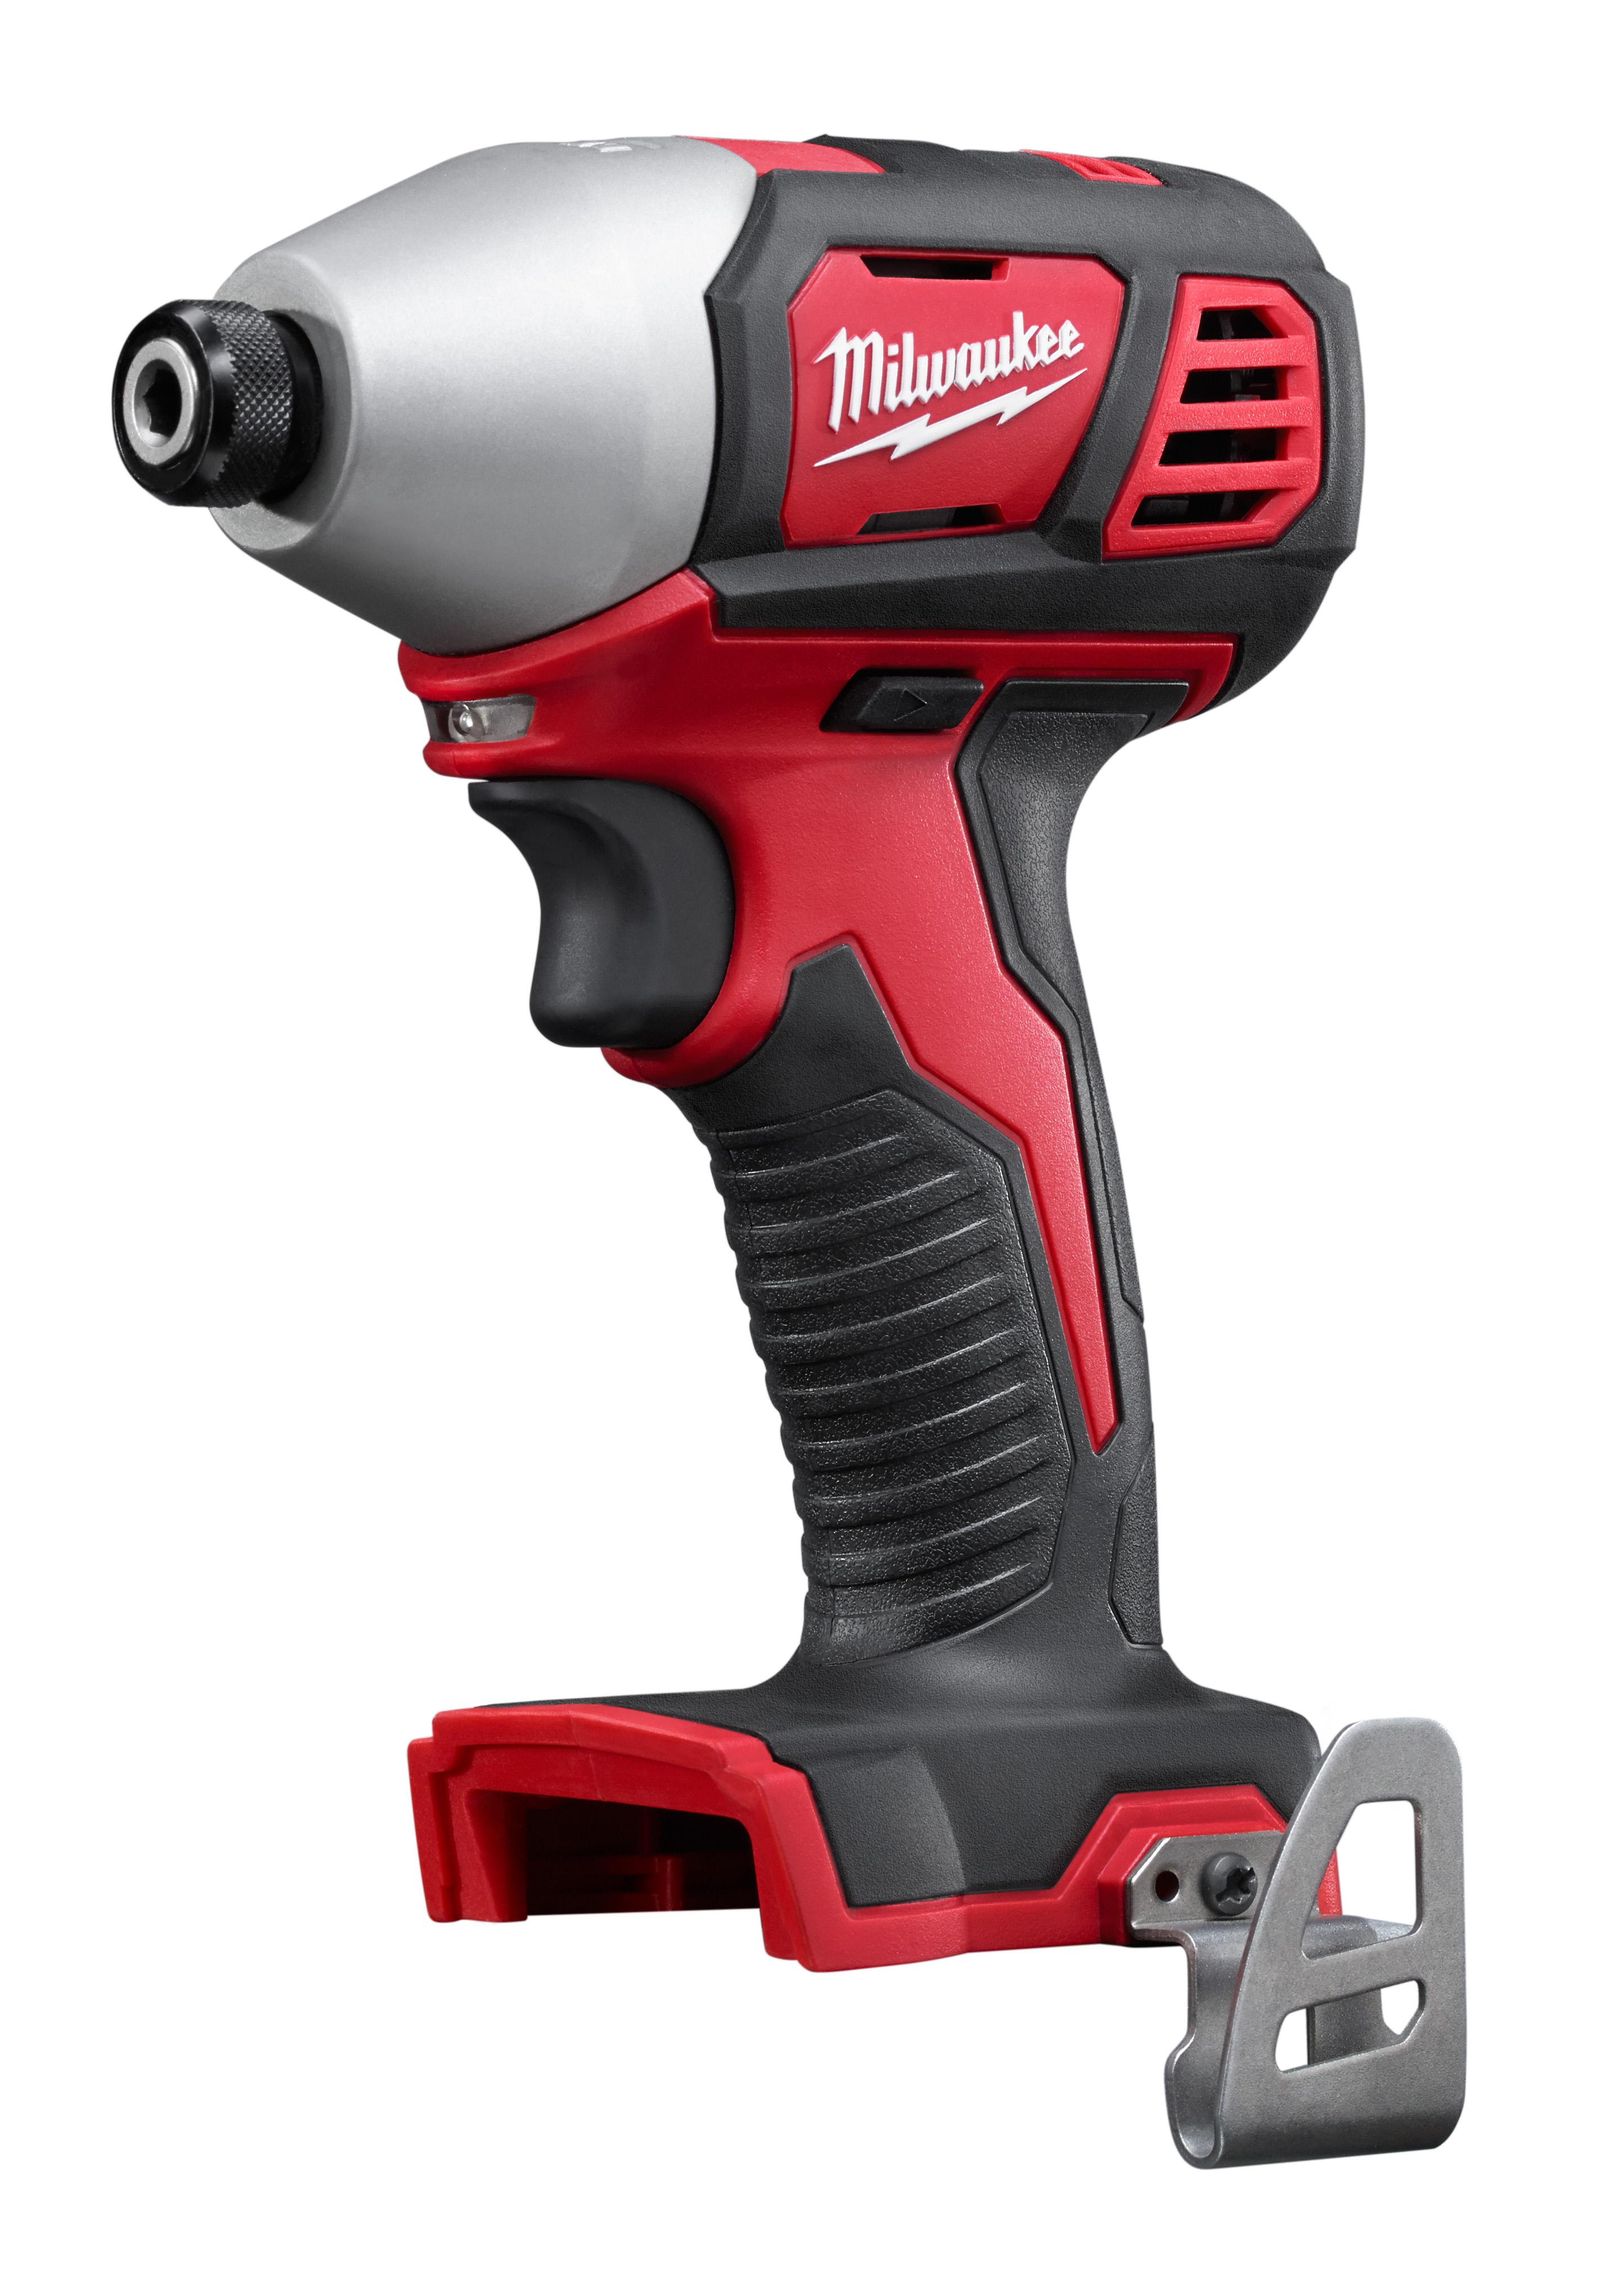 Milwaukee® M12 FUEL™ SURGE™ 2551-22 Cordless Hydraulic Driver Kit, 1/4 in Hex Drive, 3400 bpm, 450 in-lb Torque, 12 V, 5.2 in OAL